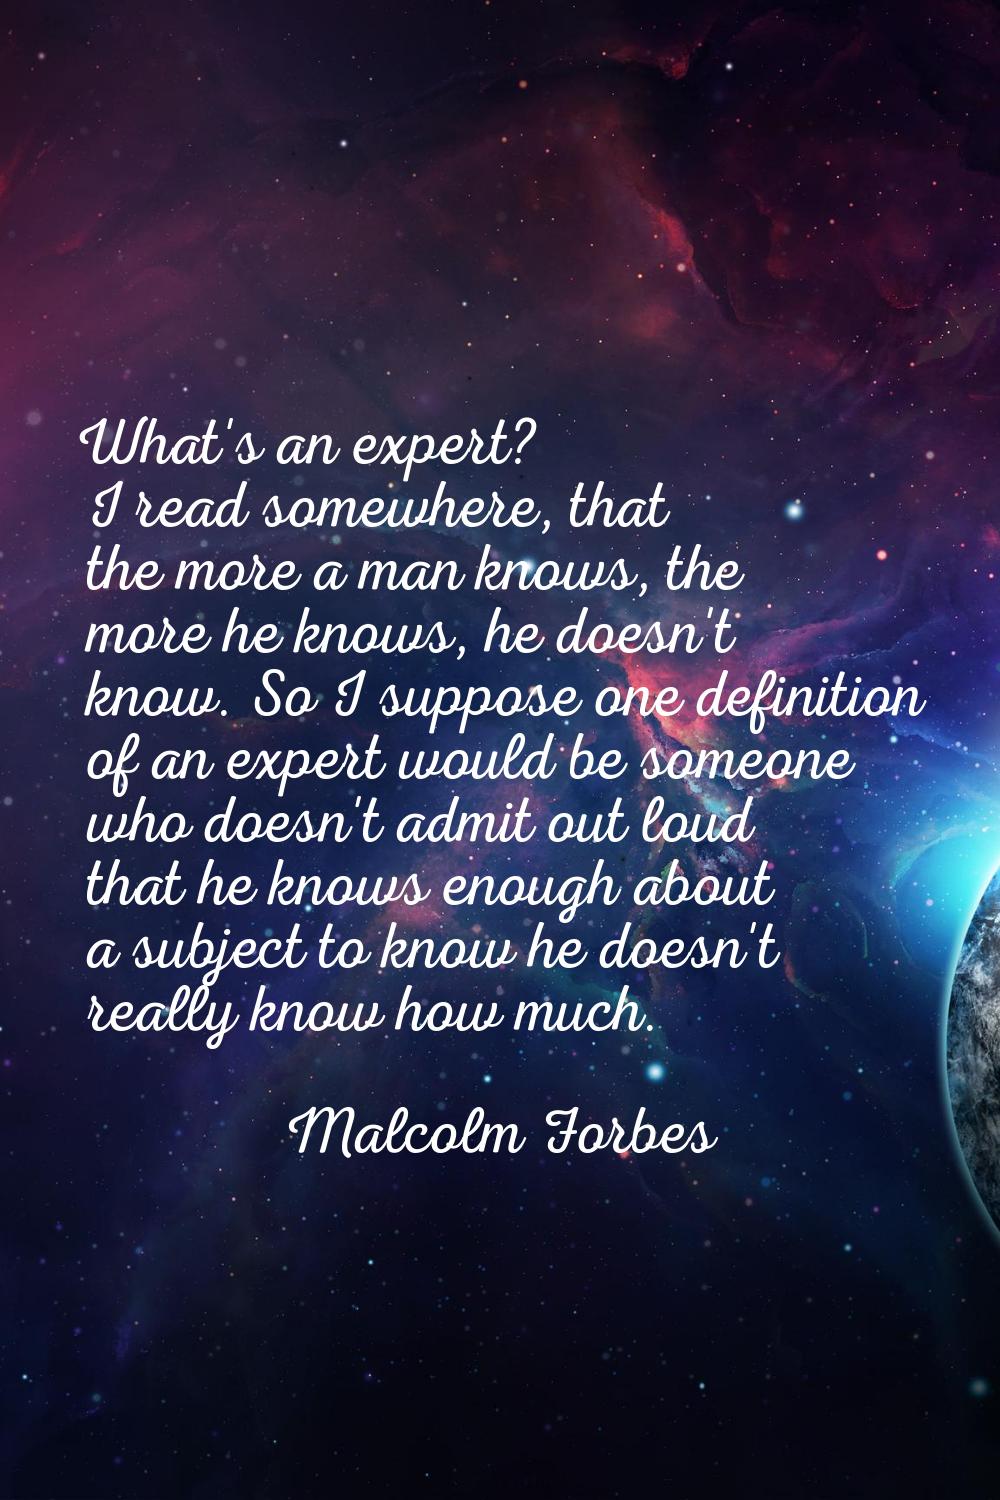 What's an expert? I read somewhere, that the more a man knows, the more he knows, he doesn't know. 